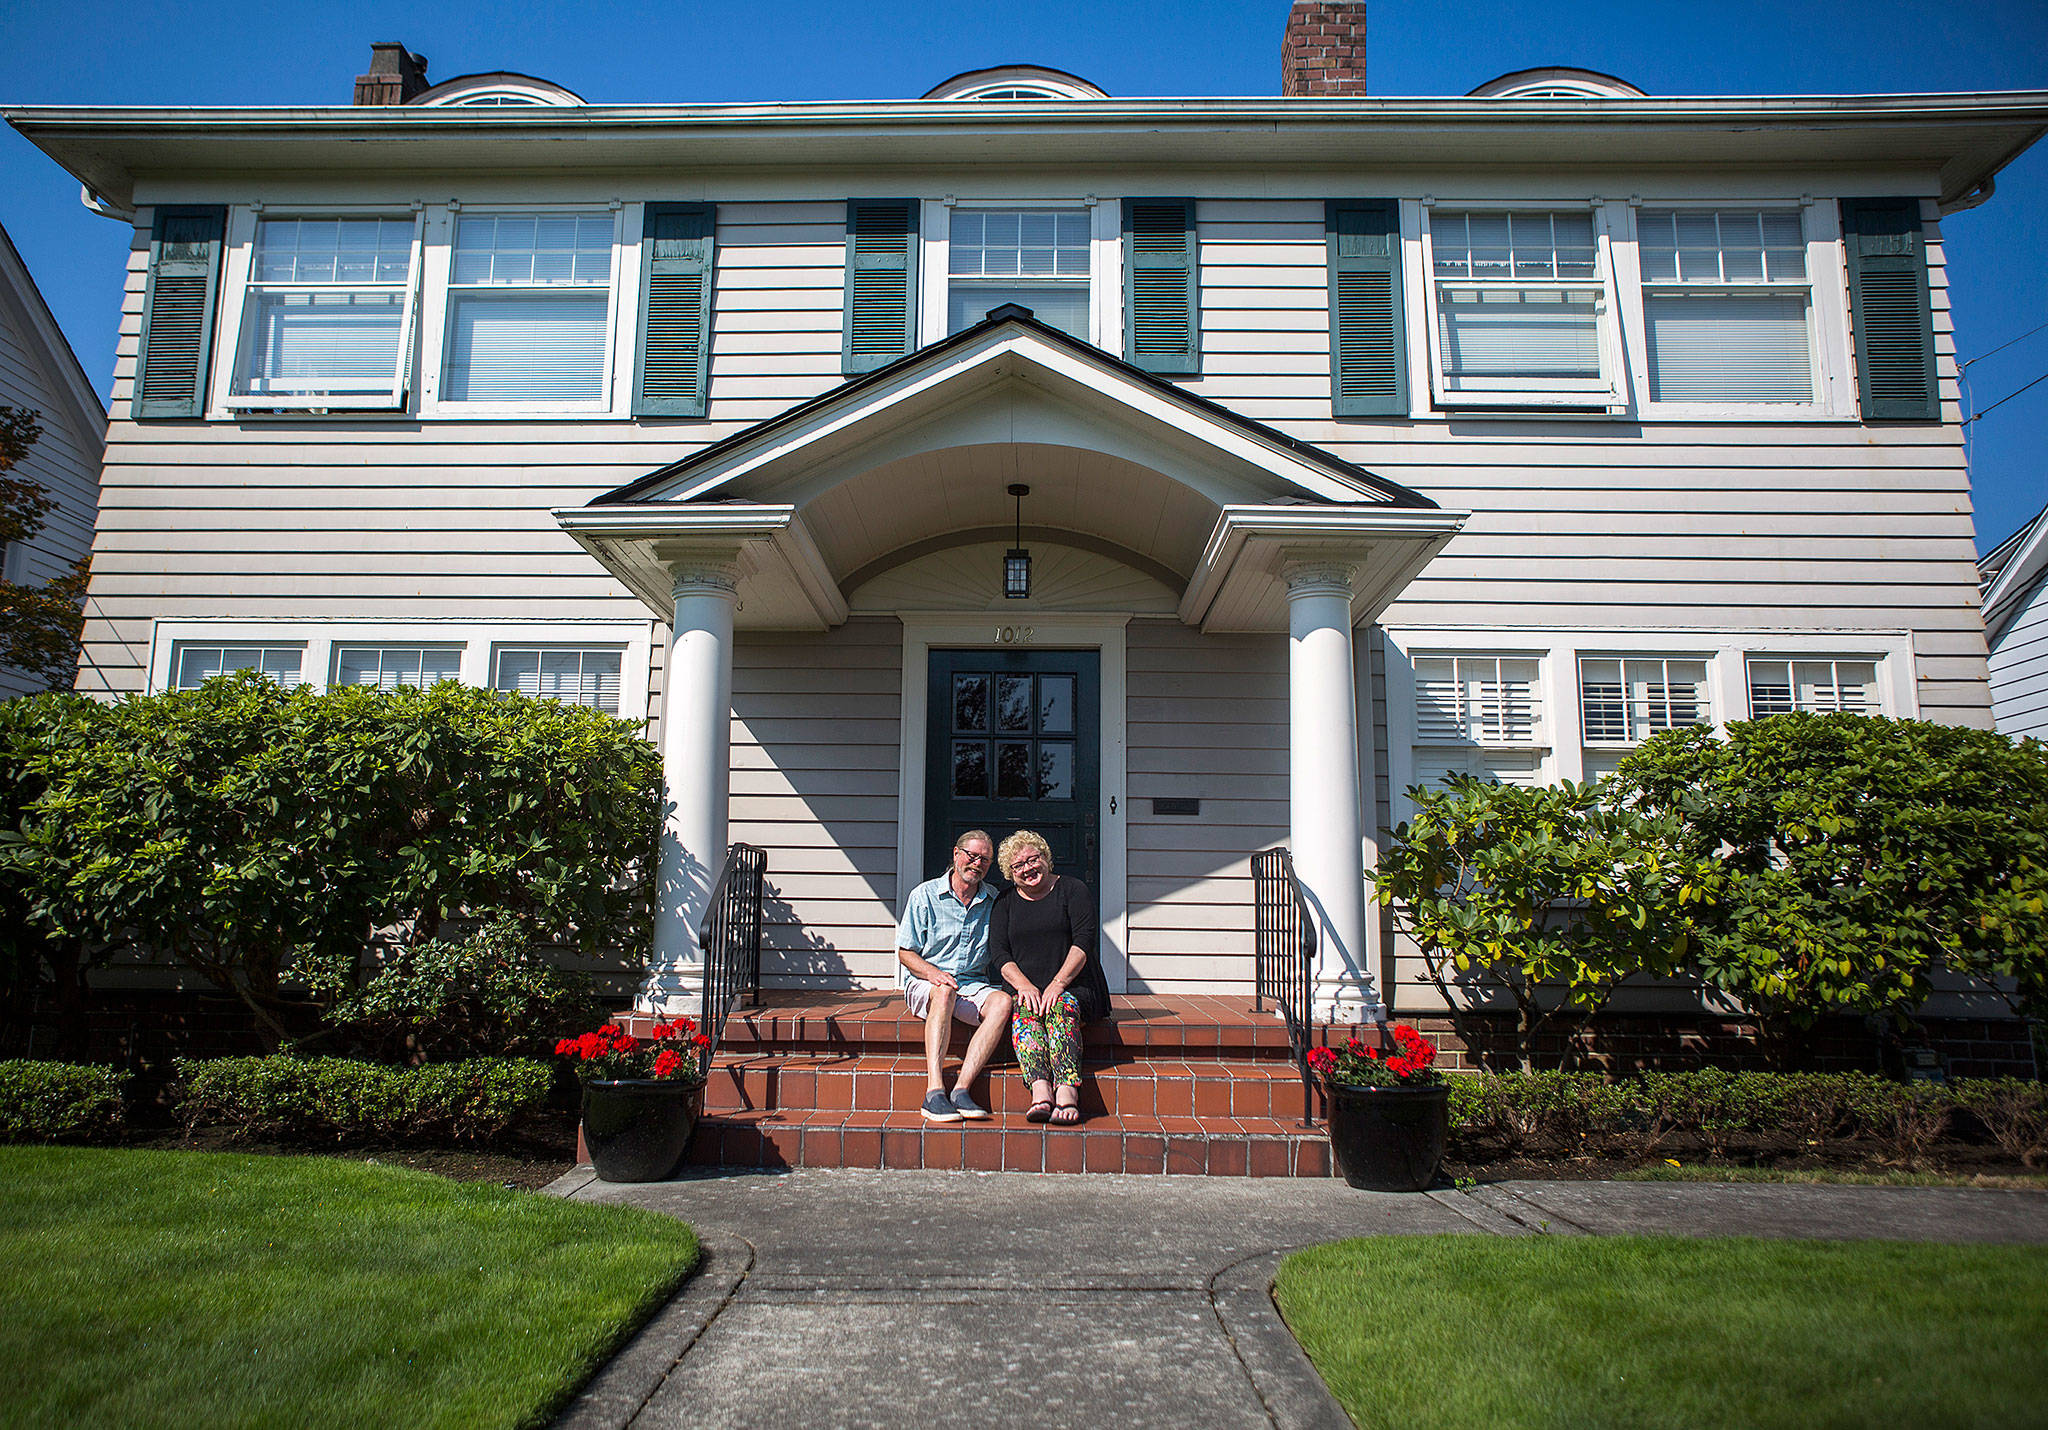 Marlies Egberding and Ritch Sorgen at their home on Sept. 5 in Everett. (Olivia Vanni / The Herald)